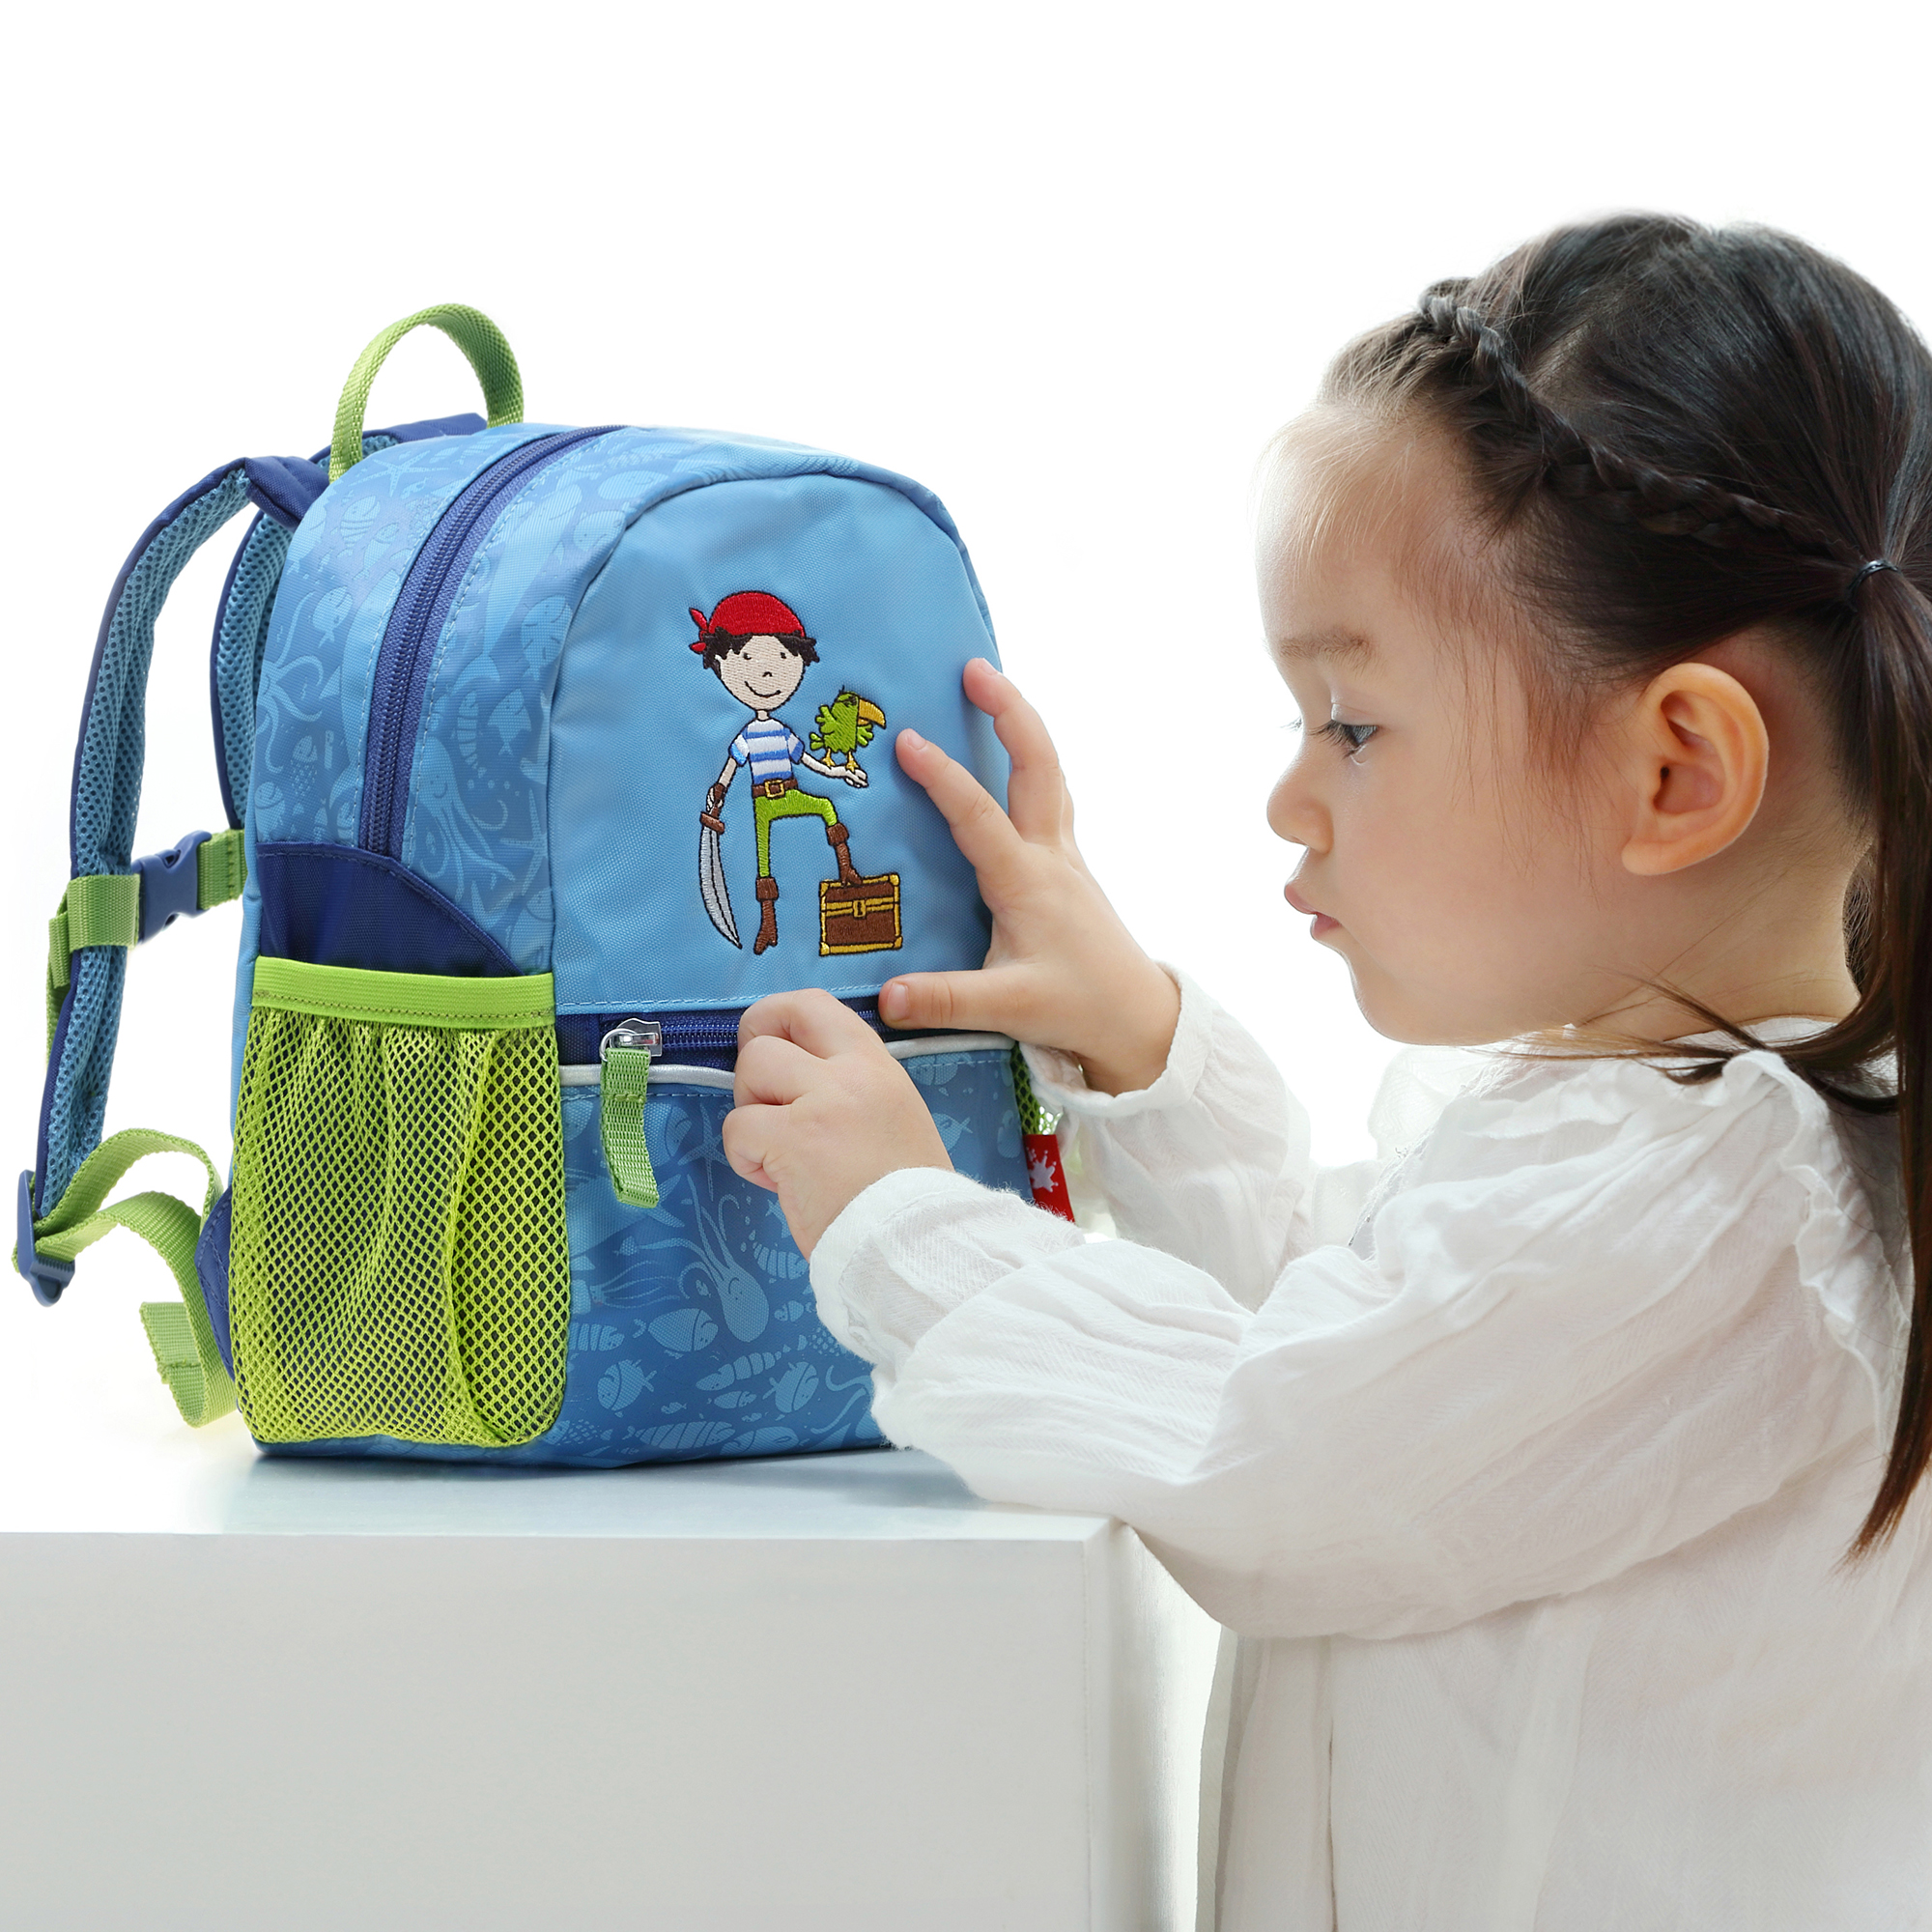 Pirate preschool backpack, small size